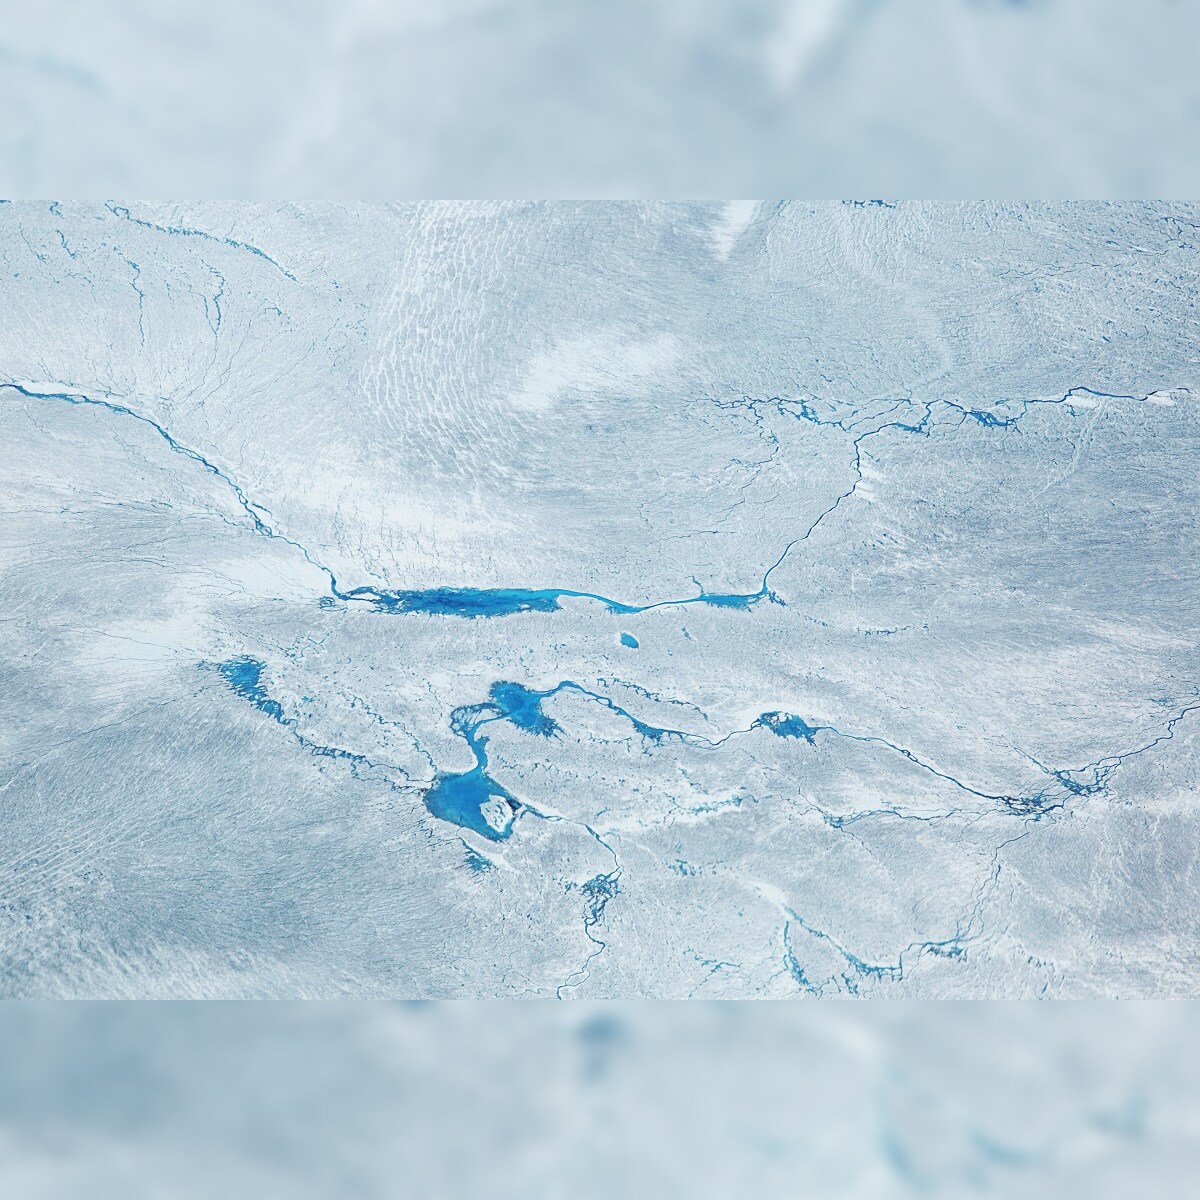 Huge Antarctic Lake Disappeared Into the Ocean Within a Week Due to Climate Change, Study Finds